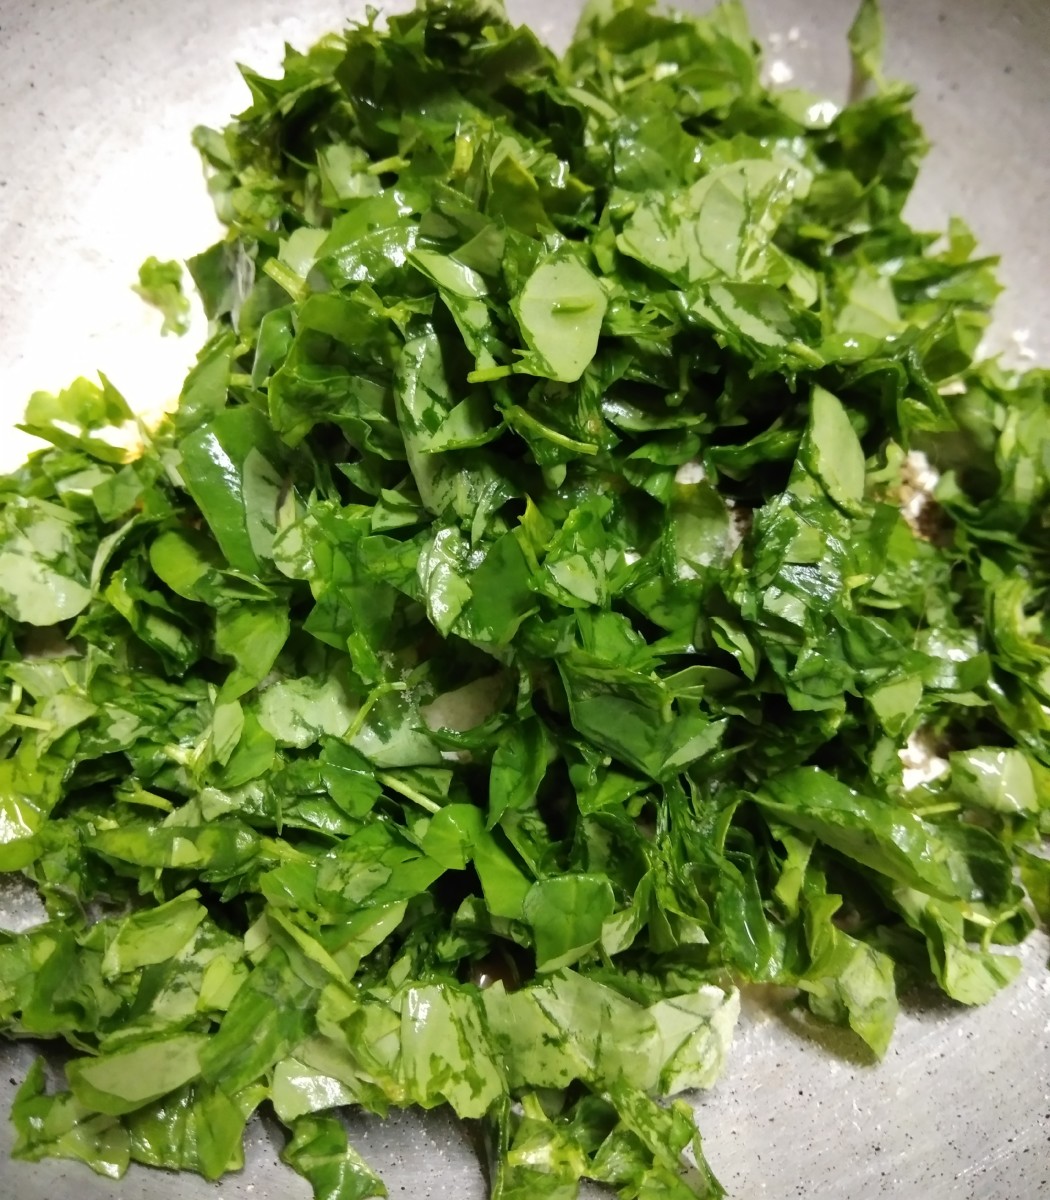 Now finely chop washed and drained fenugreek leaves and add to the wheat flour mixture.